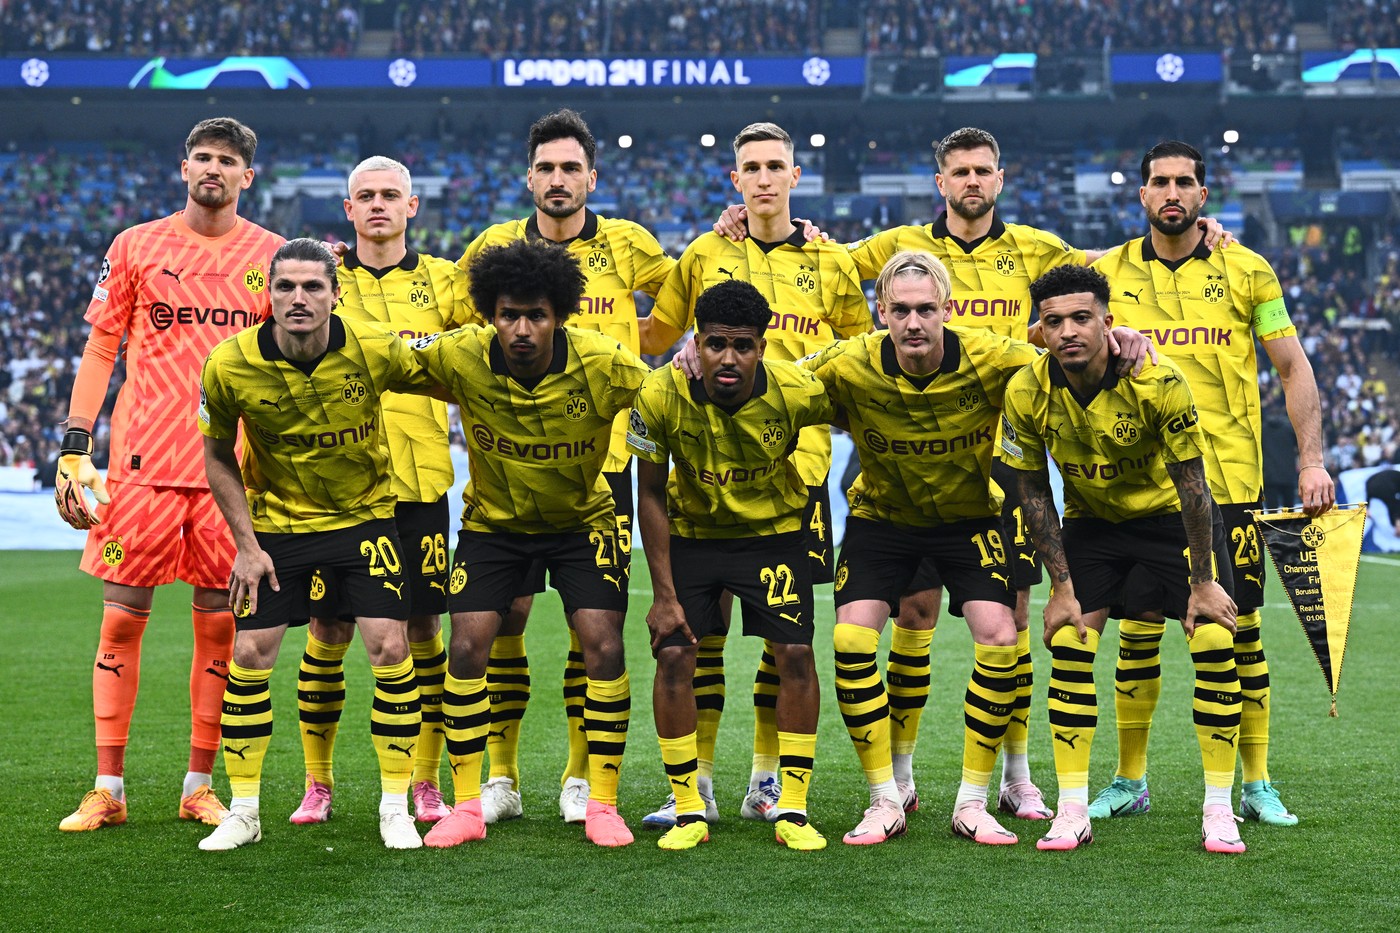 01 June 2024, Great Britain, London: Soccer: Champions League, Borussia Dortmund - Real Madrid, knockout round, final at Wembley Stadium, the Dortmund team lines up before the match.,Image: 878169864, License: Rights-managed, Restrictions: , Model Release: no